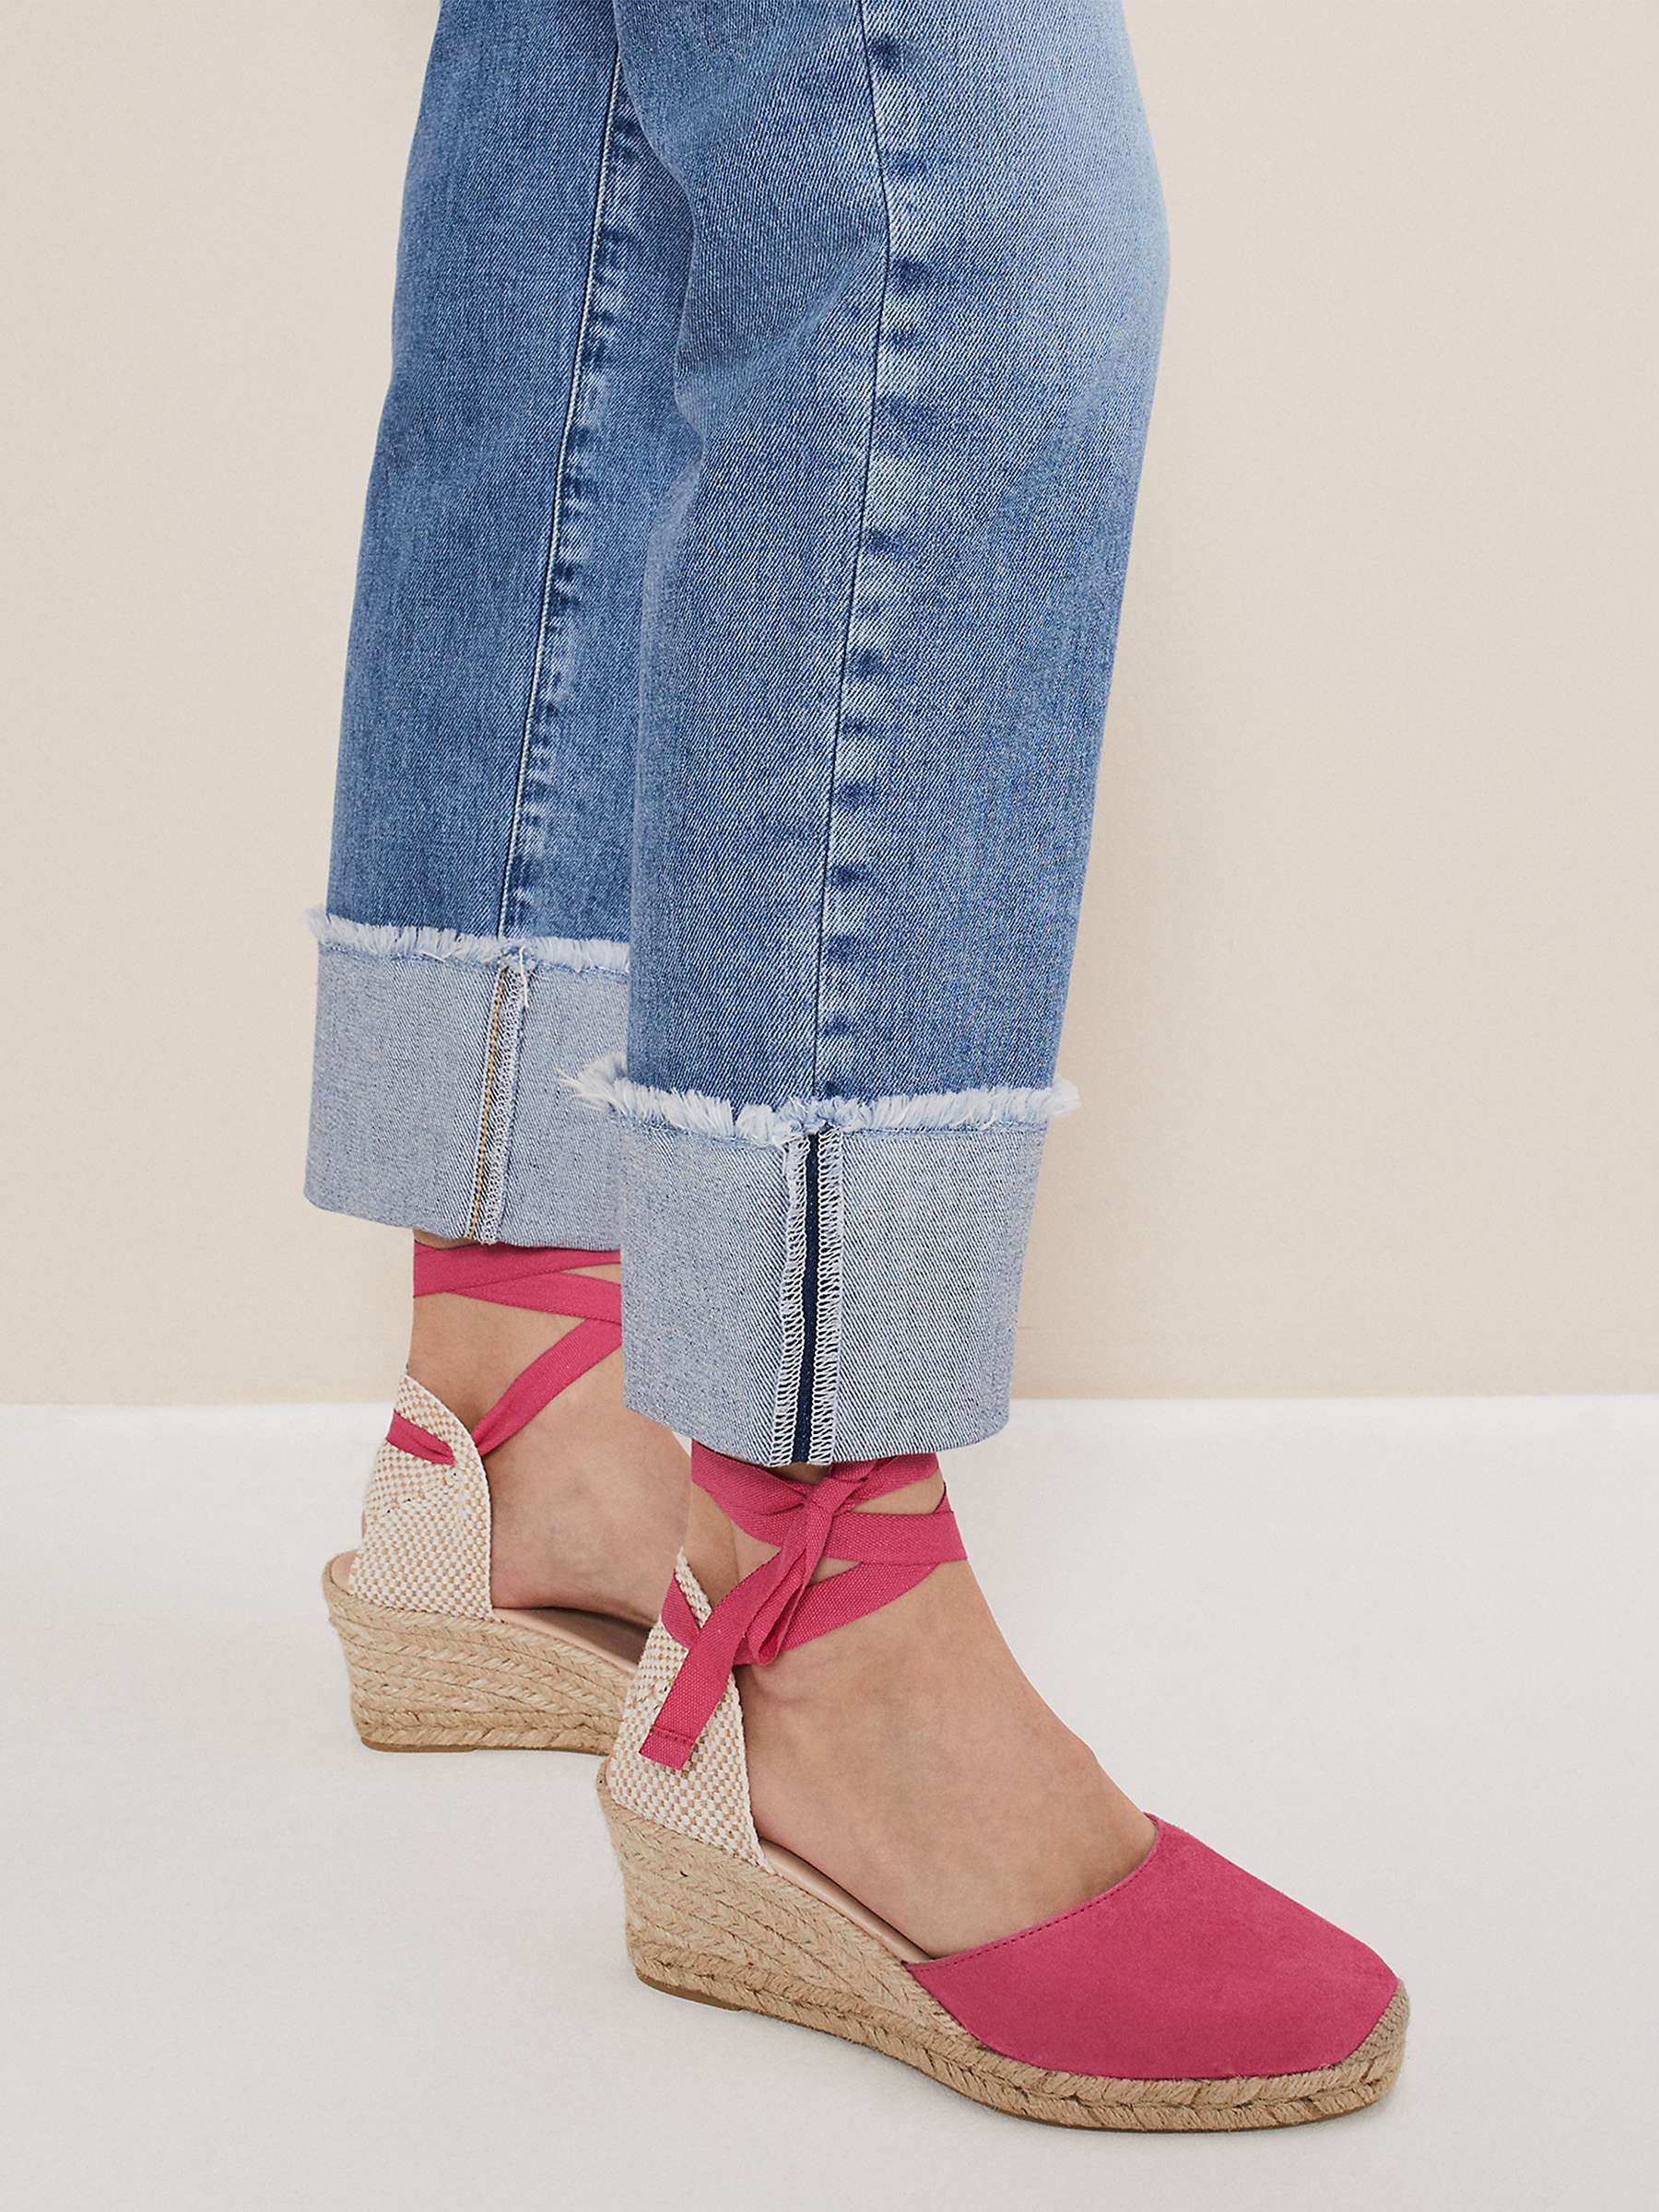 Buy Phase Eight Suede Ankle Tie Espadrilles, Bright Pink Online at johnlewis.com